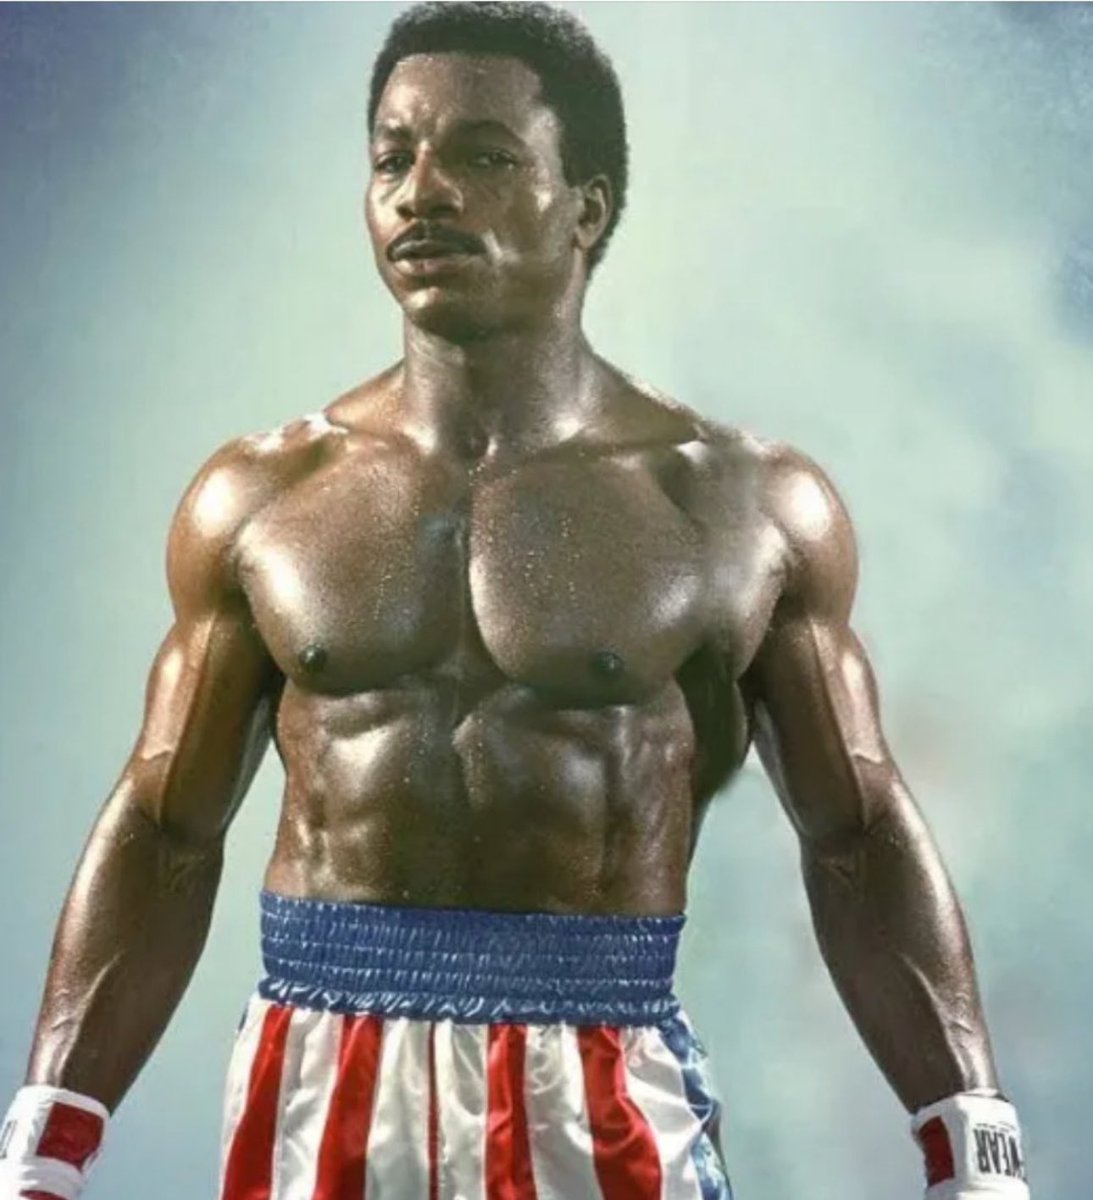 I was always a fan of the heels. Apollo Creed was one of the first I came across as a kid. Man, I got a kick out of him ruffling feathers and talking smack. RIP Carl Weathers. 👊🏽🙏🏽❤️